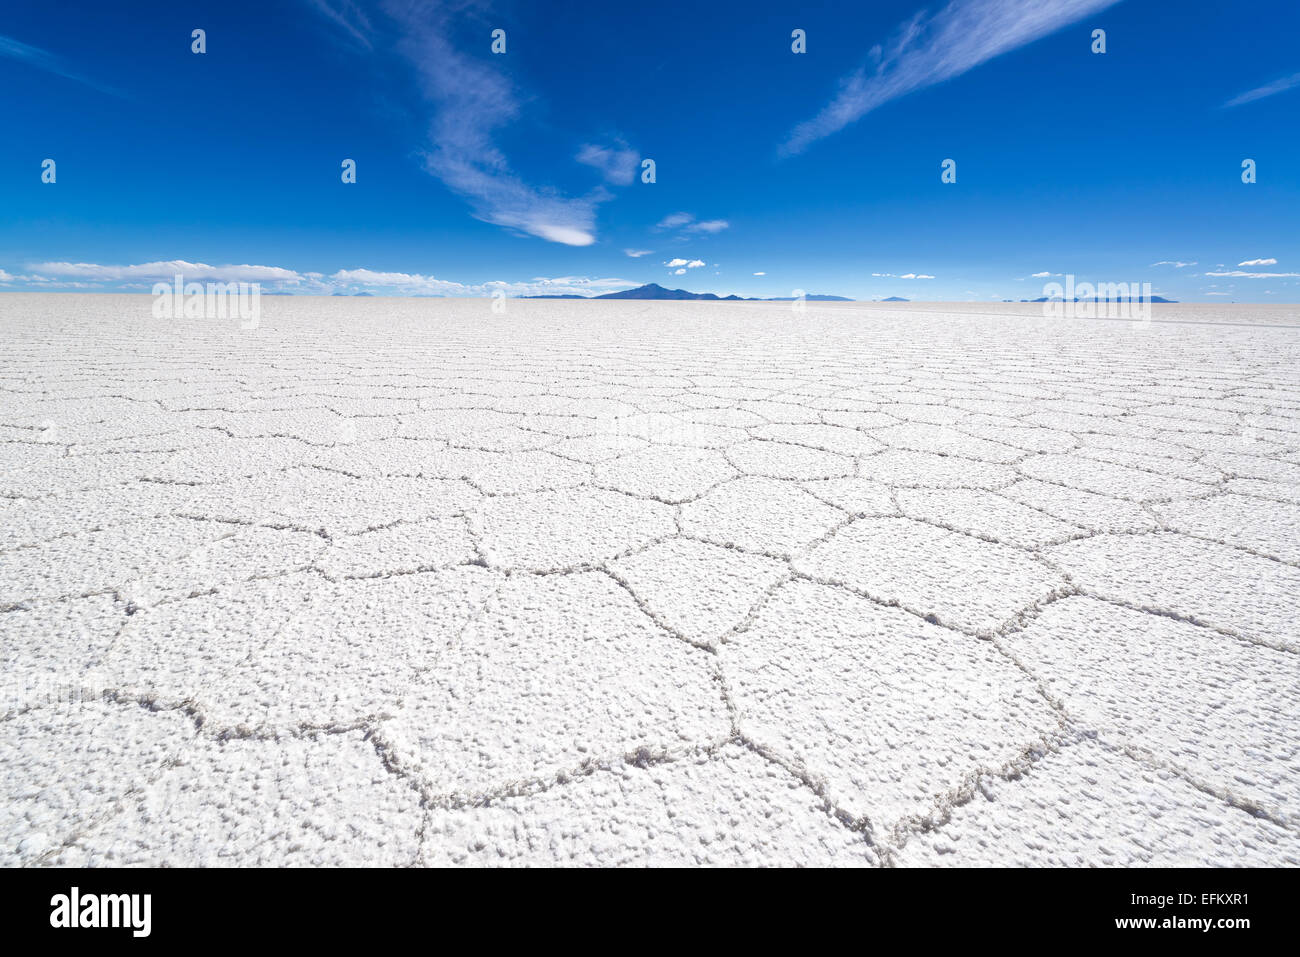 Details of the Uyuni Salt Flat in southern Bolivia Stock Photo